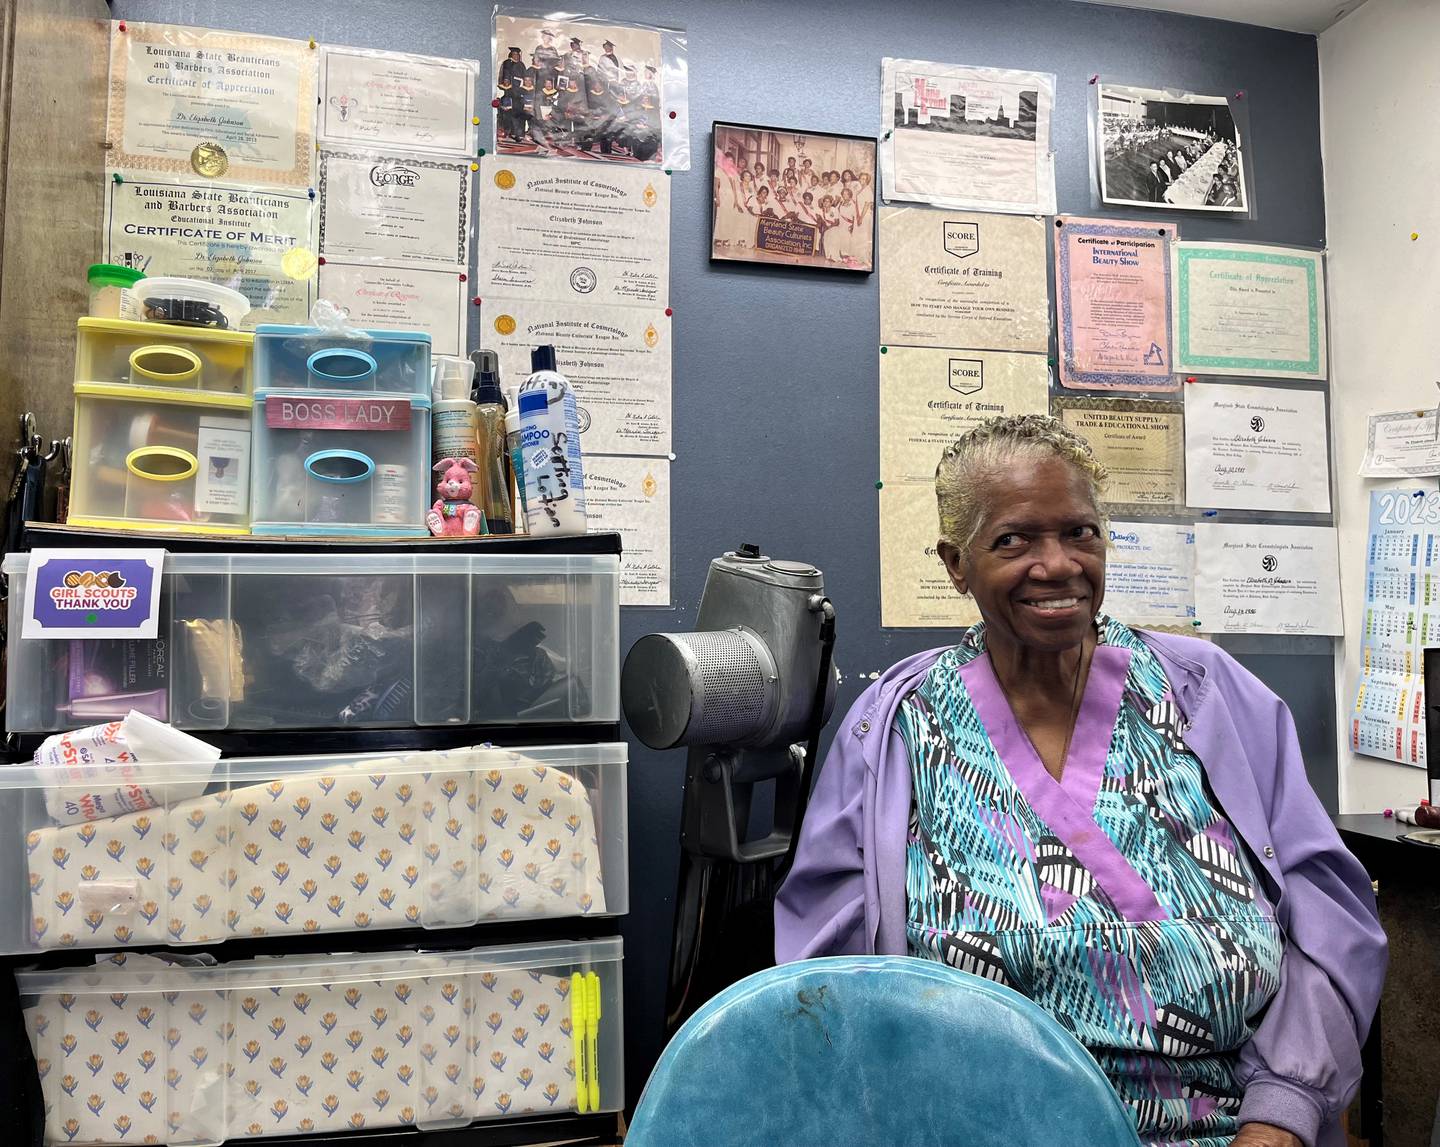 Elizabeth Johnson has been doing hair in Baltimore since the late 1950s. Her beauty salon is considered one of the oldest Black owned businesses on Pennsylvania Avenue.